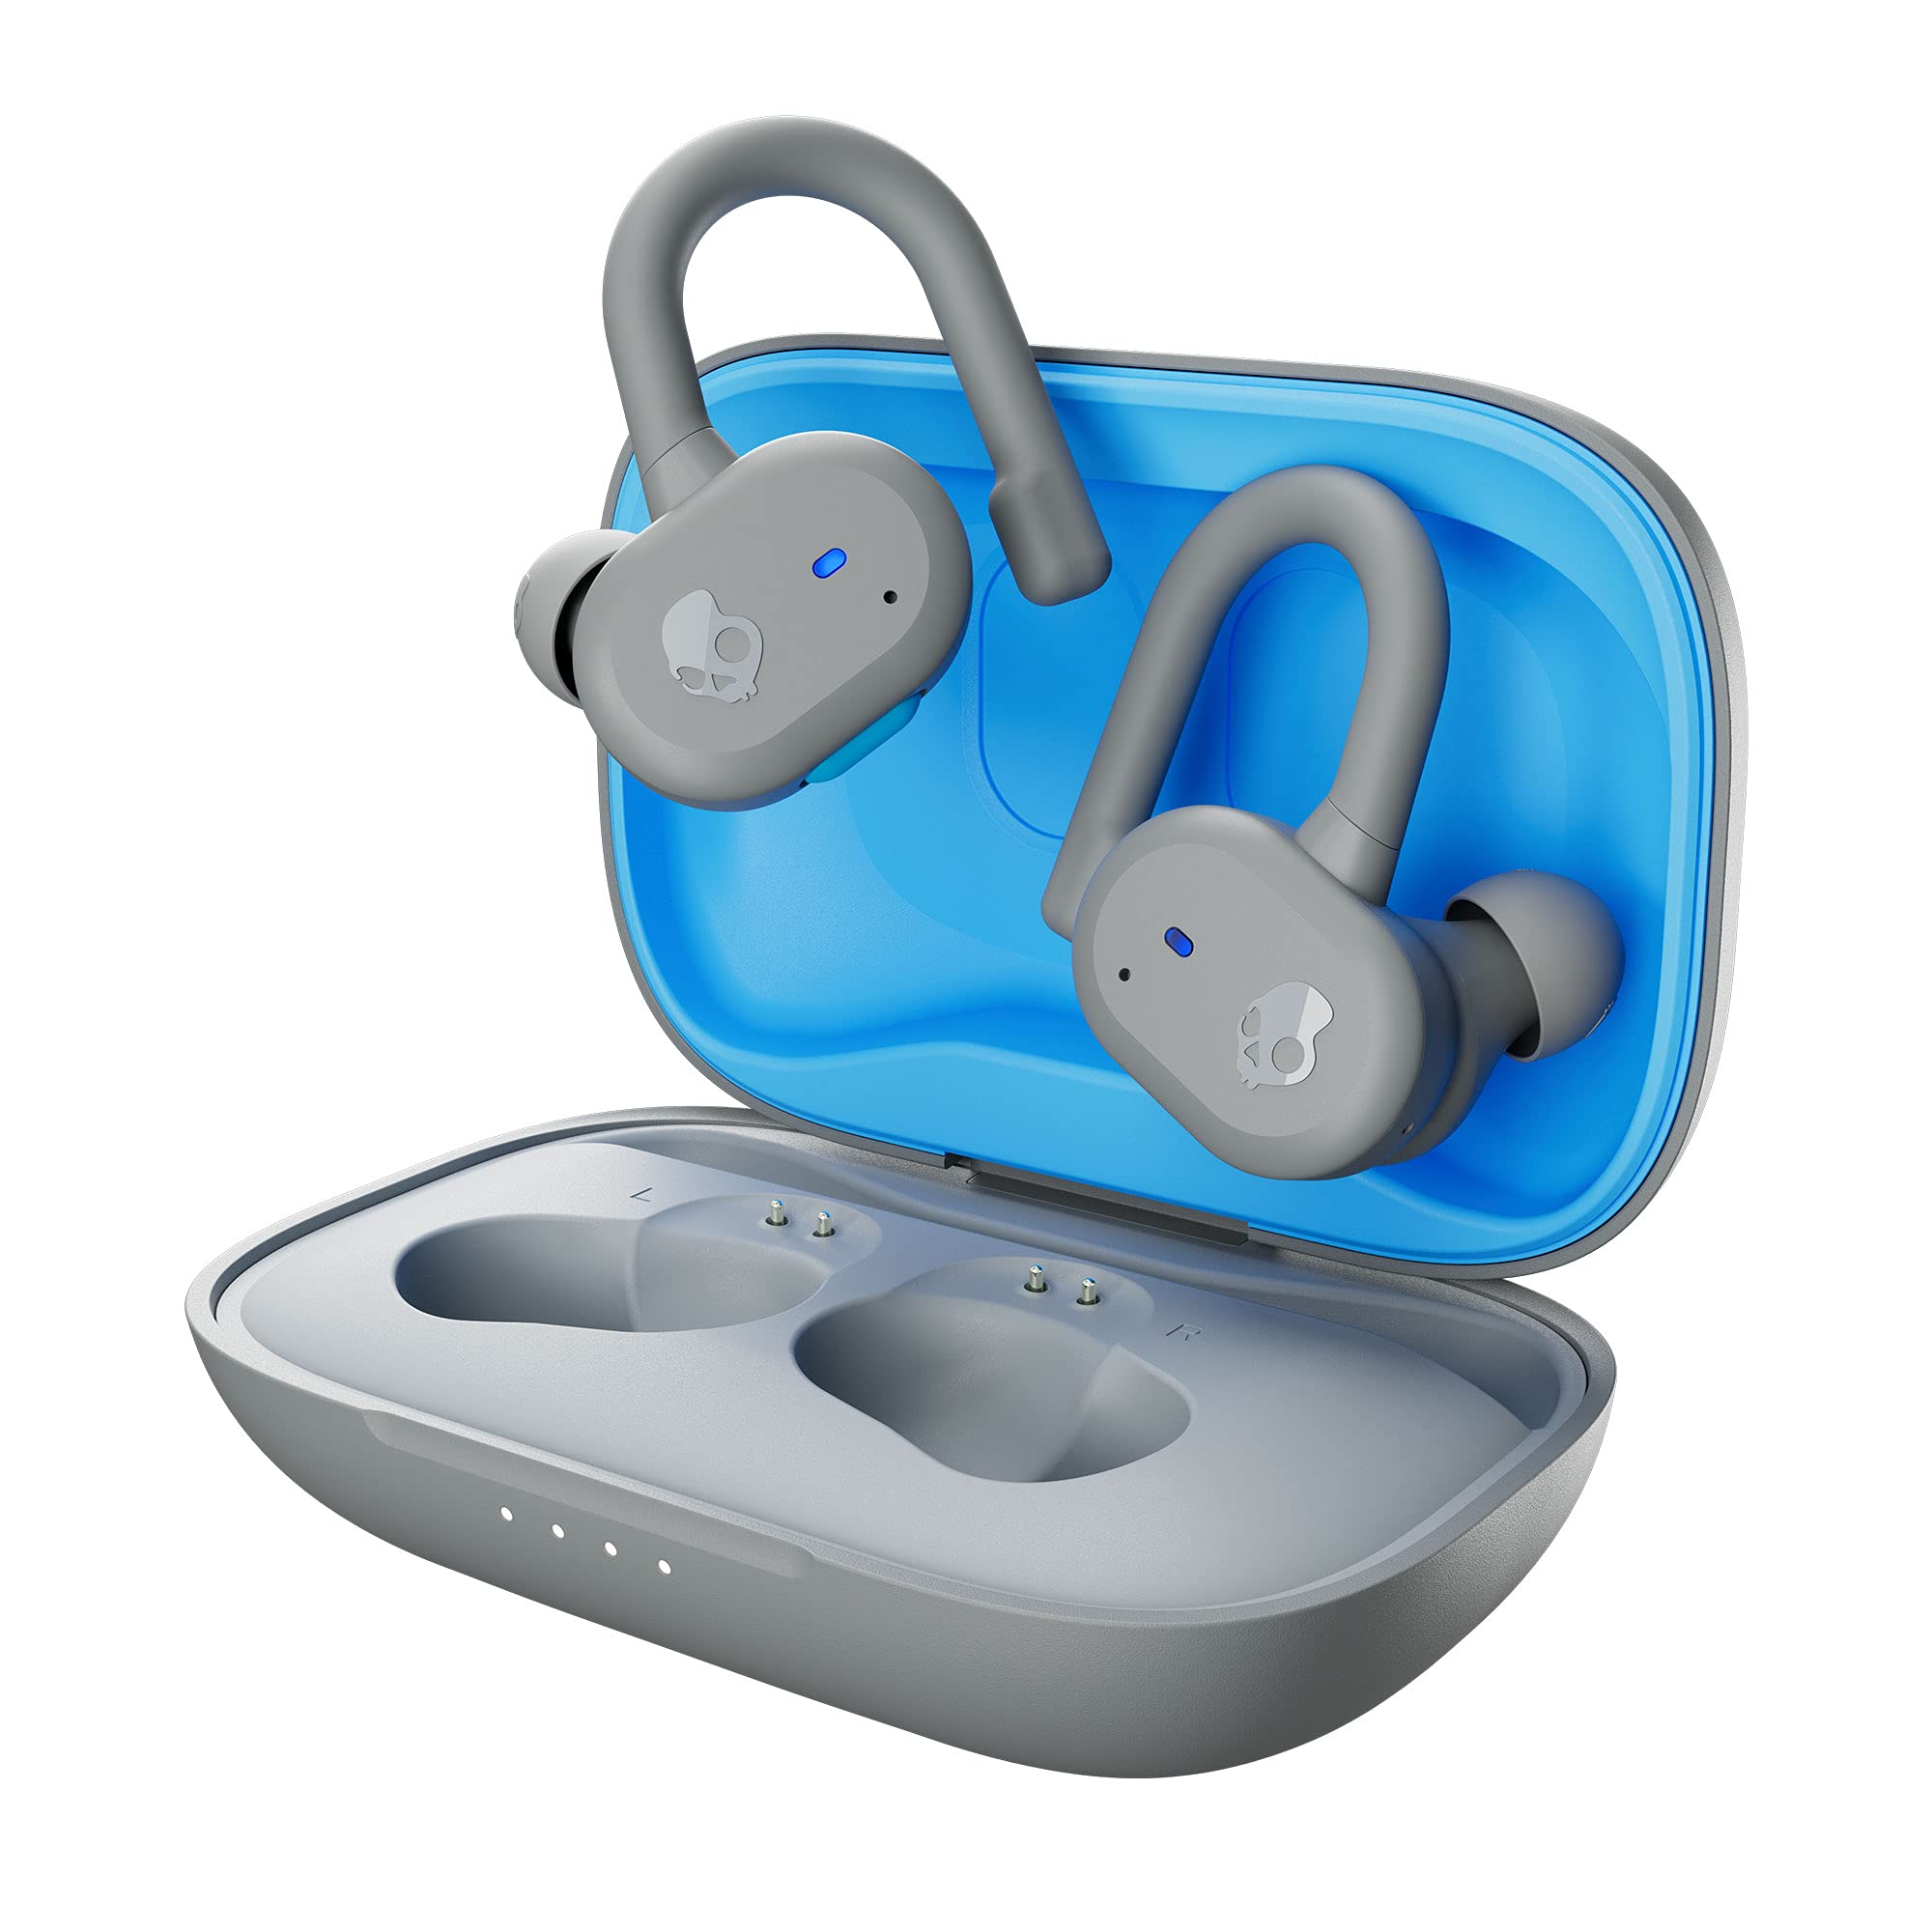 Connecting Skullcandy Wireless Earbuds To Your IPad